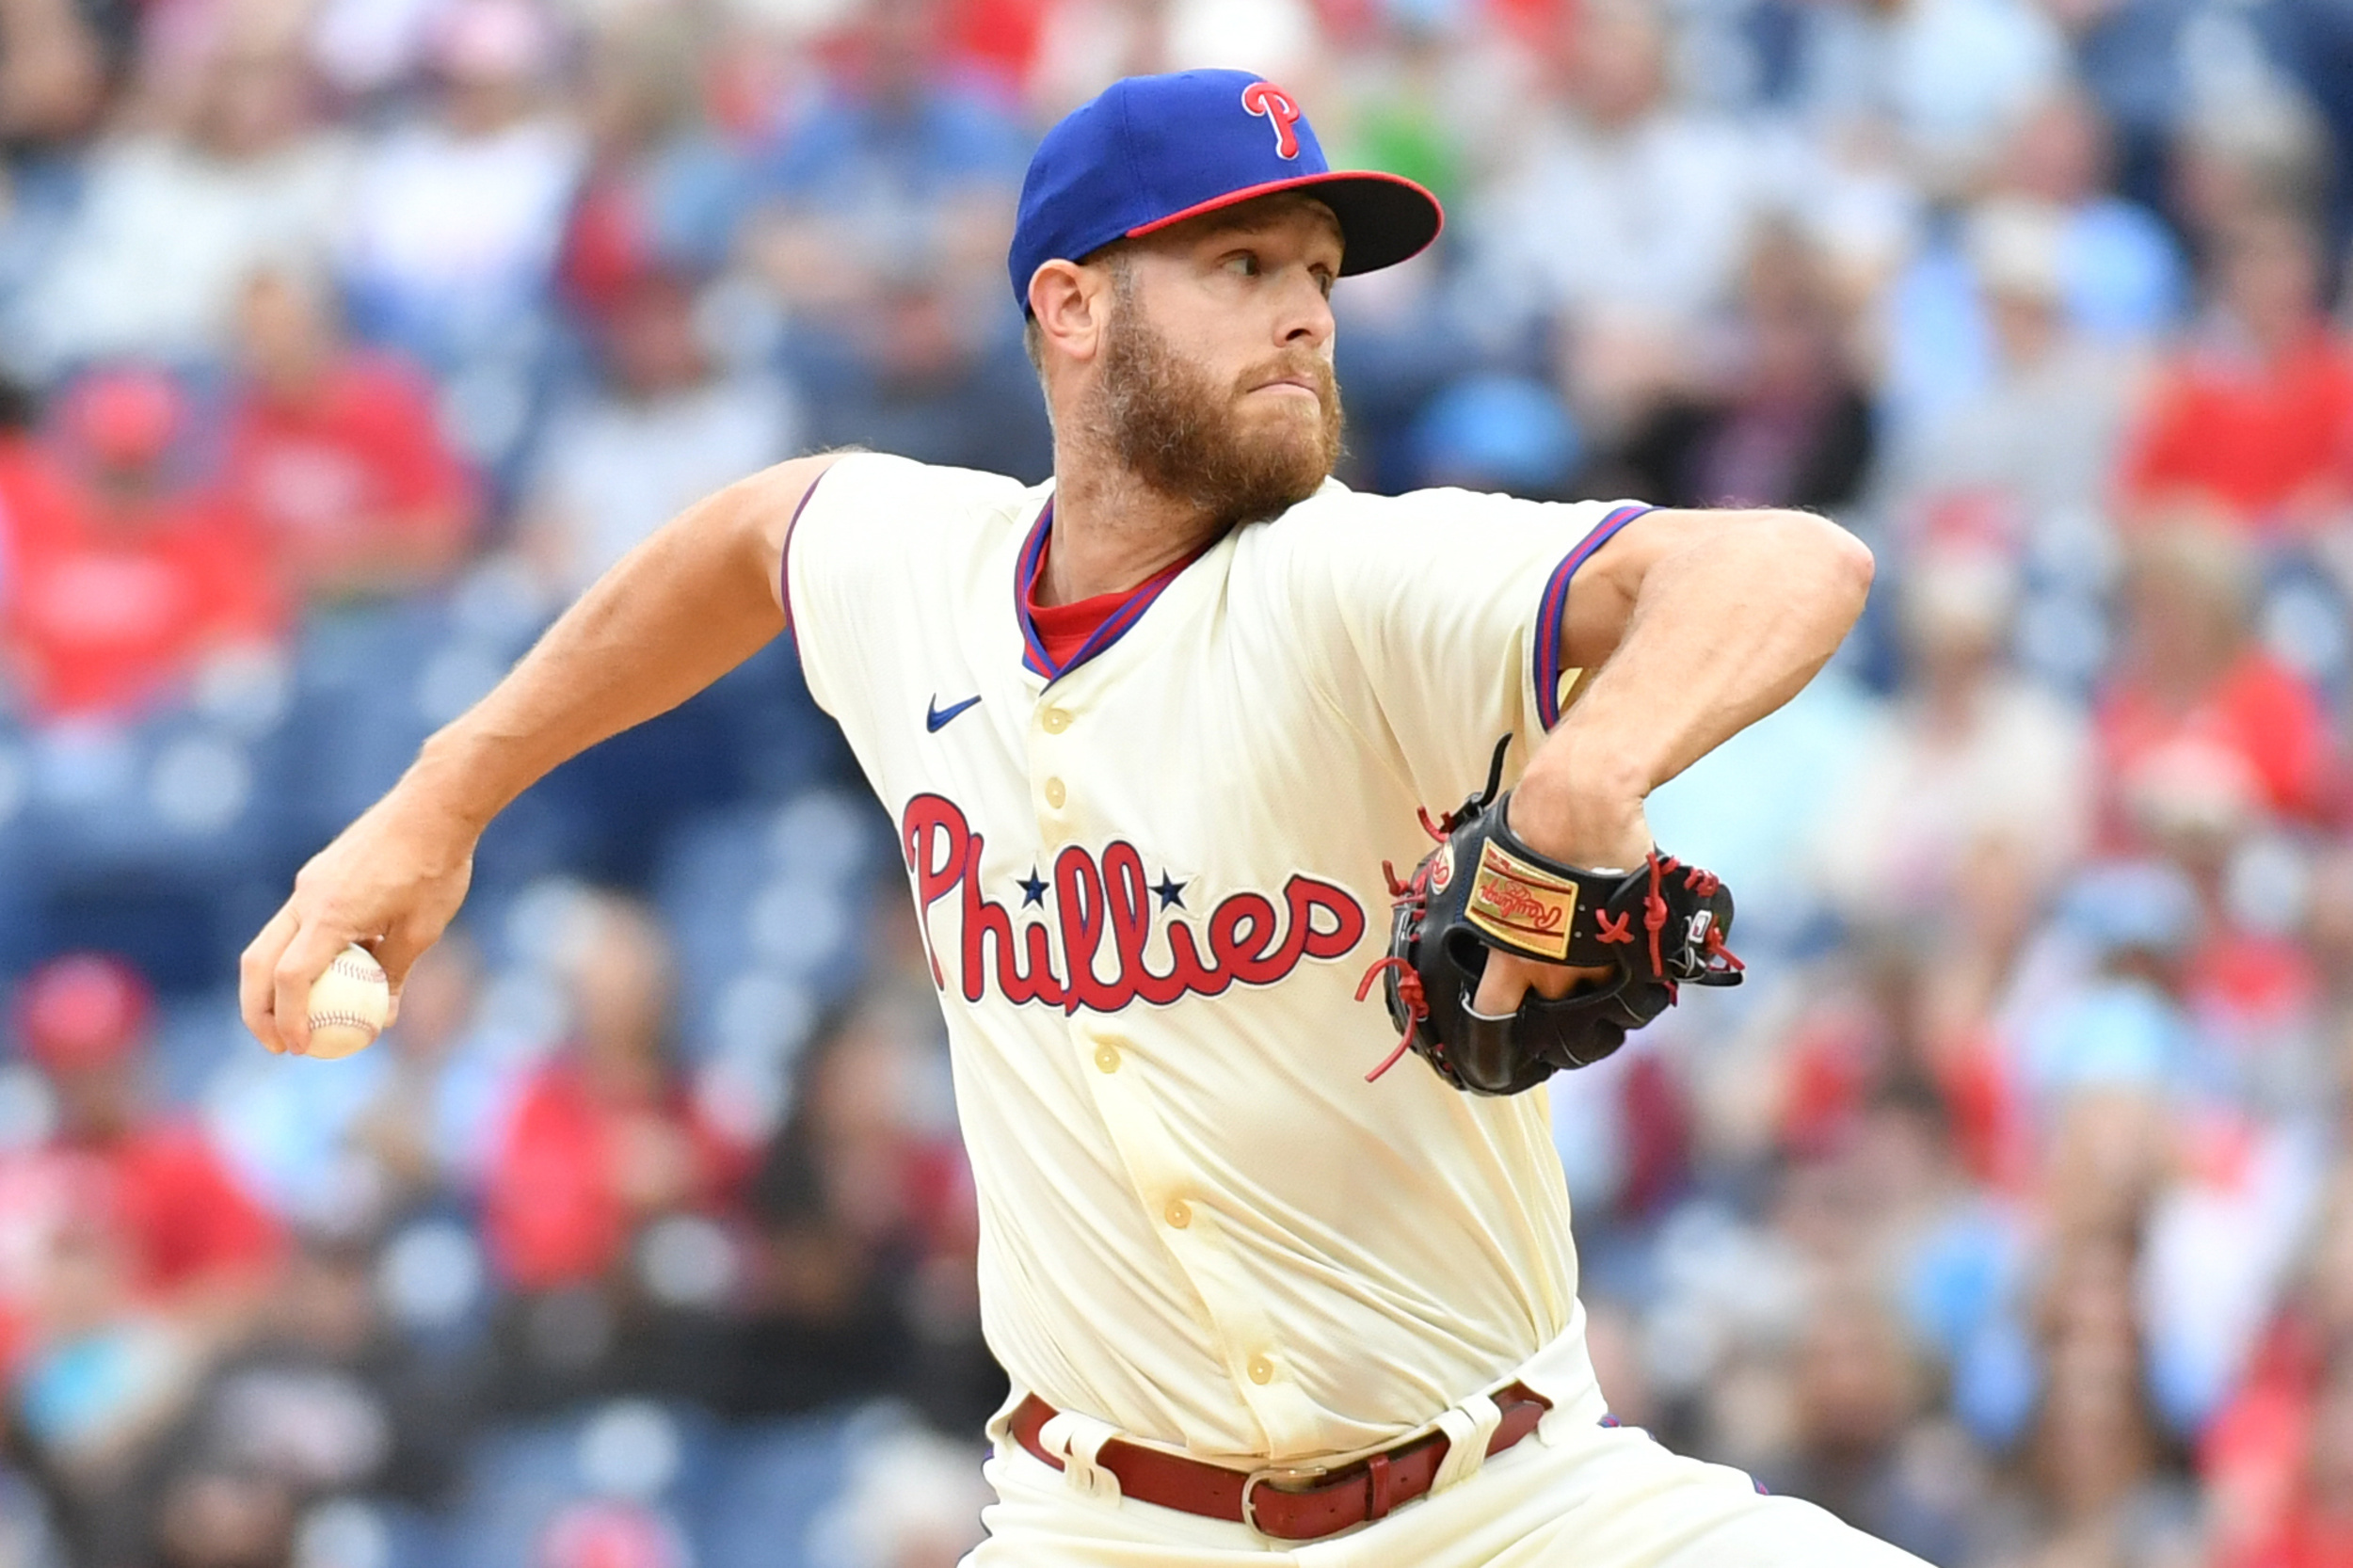 phillies remain mlb's hottest team with dominant zack wheeler performance